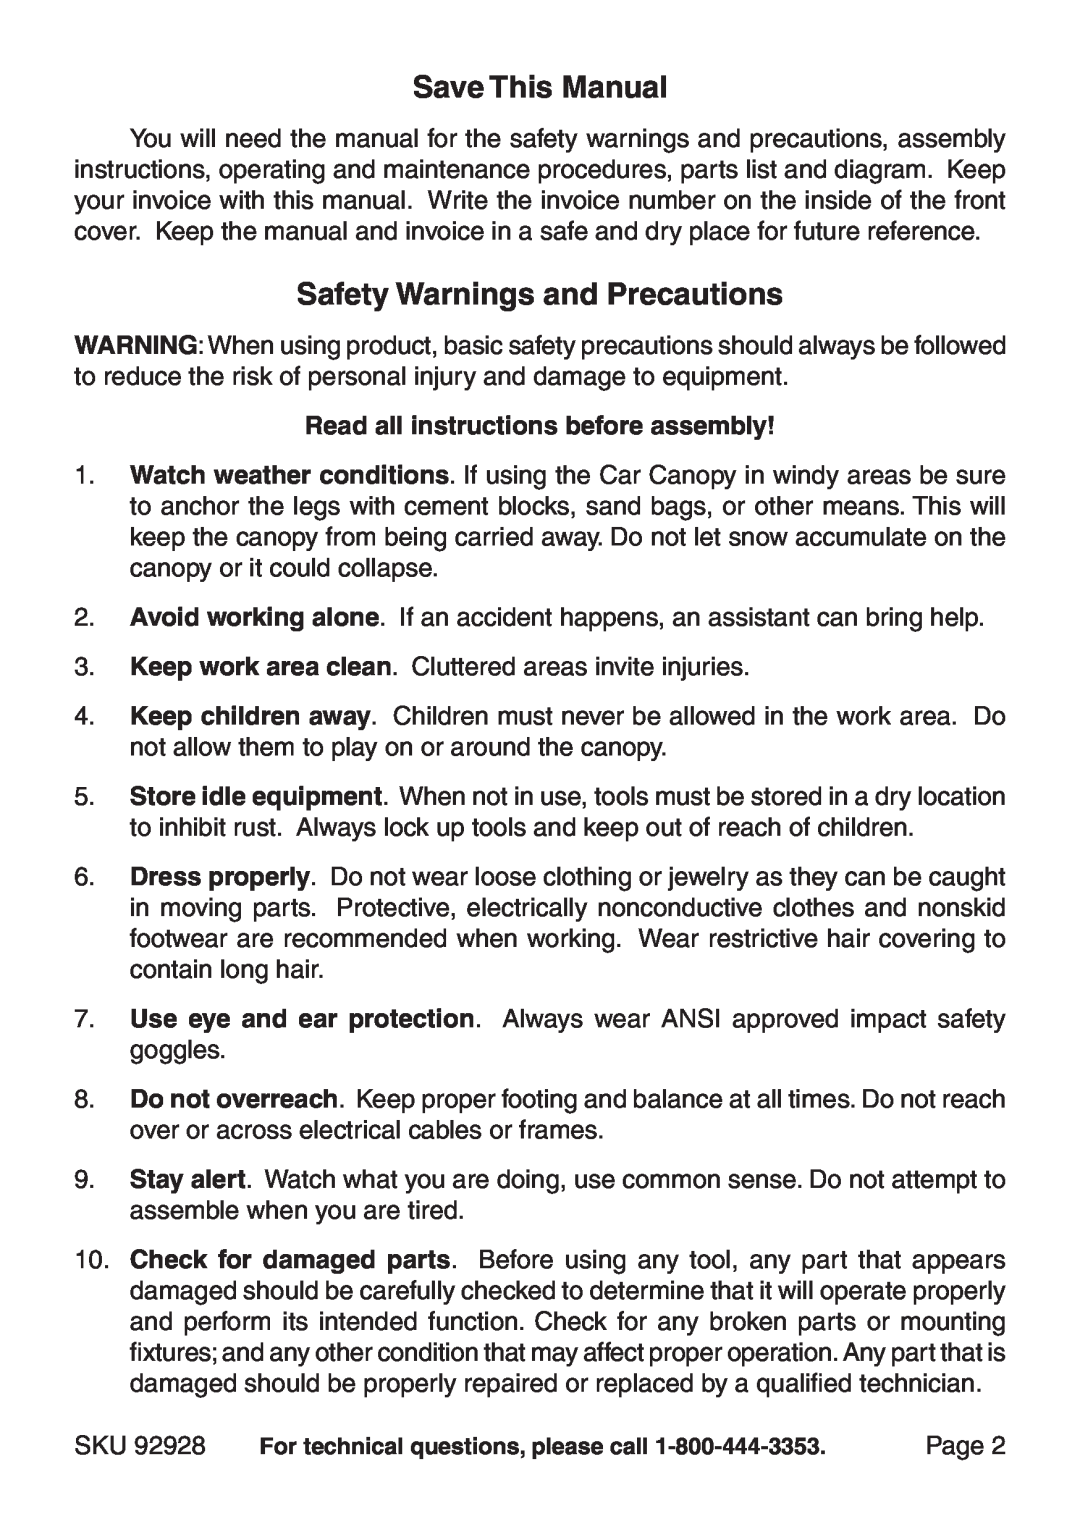 Harbor Freight Tools 92928 Save This Manual, Safety Warnings and Precautions, Read all instructions before assembly, Page 